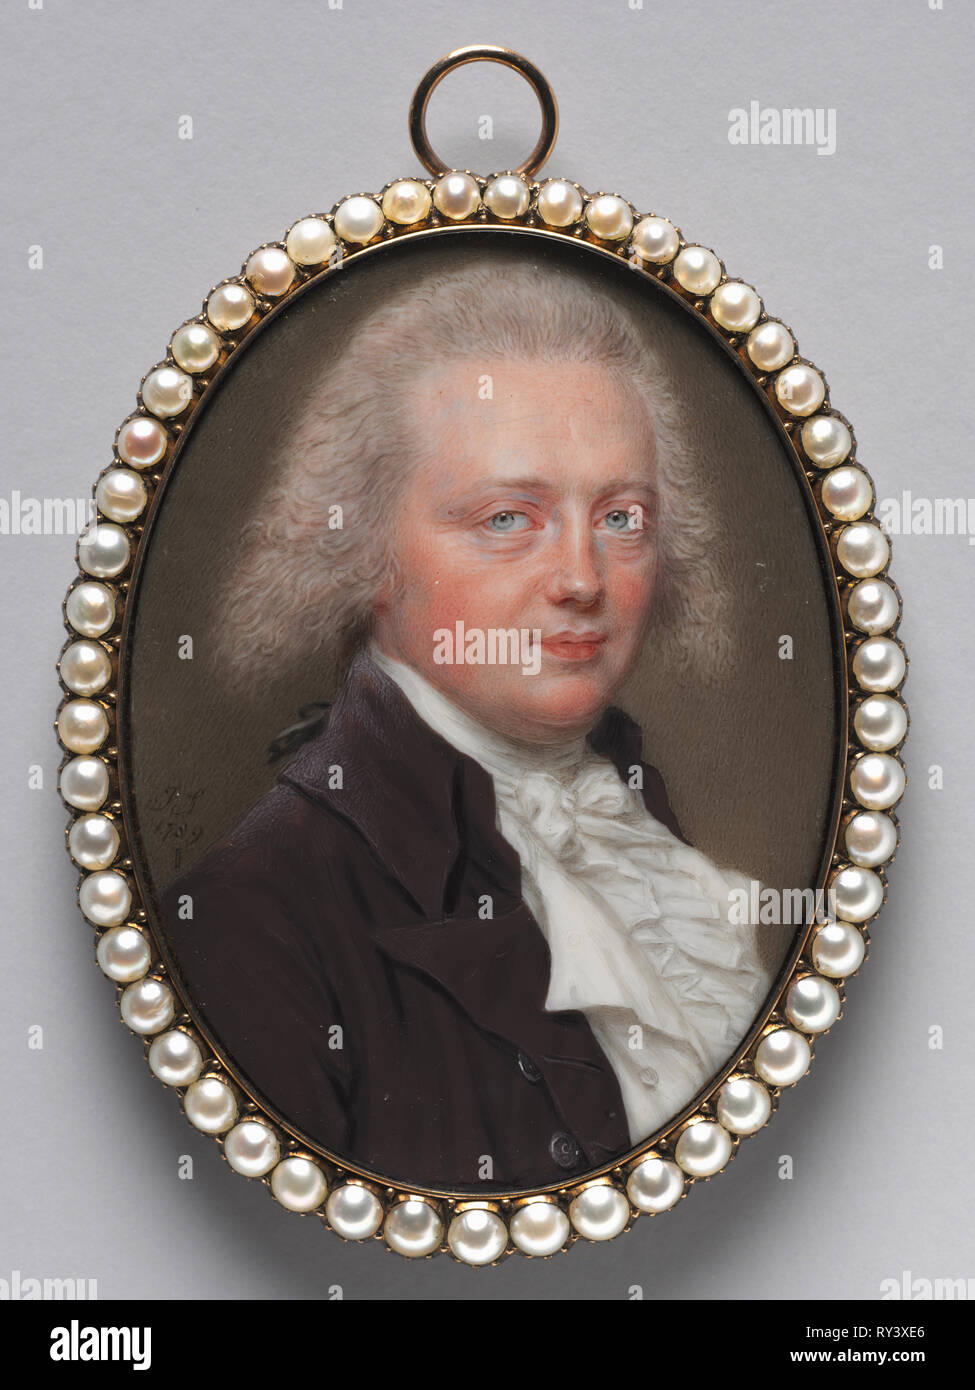 Portrait of a Man, 1789. John I Smart (British, 1741-1811). Watercolor on ivory in a gold and seed pearl frame; framed: 7.1 x 5.5 cm (2 13/16 x 2 3/16 in.); unframed: 6.2 x 4.5 cm (2 7/16 x 1 3/4 in Stock Photo